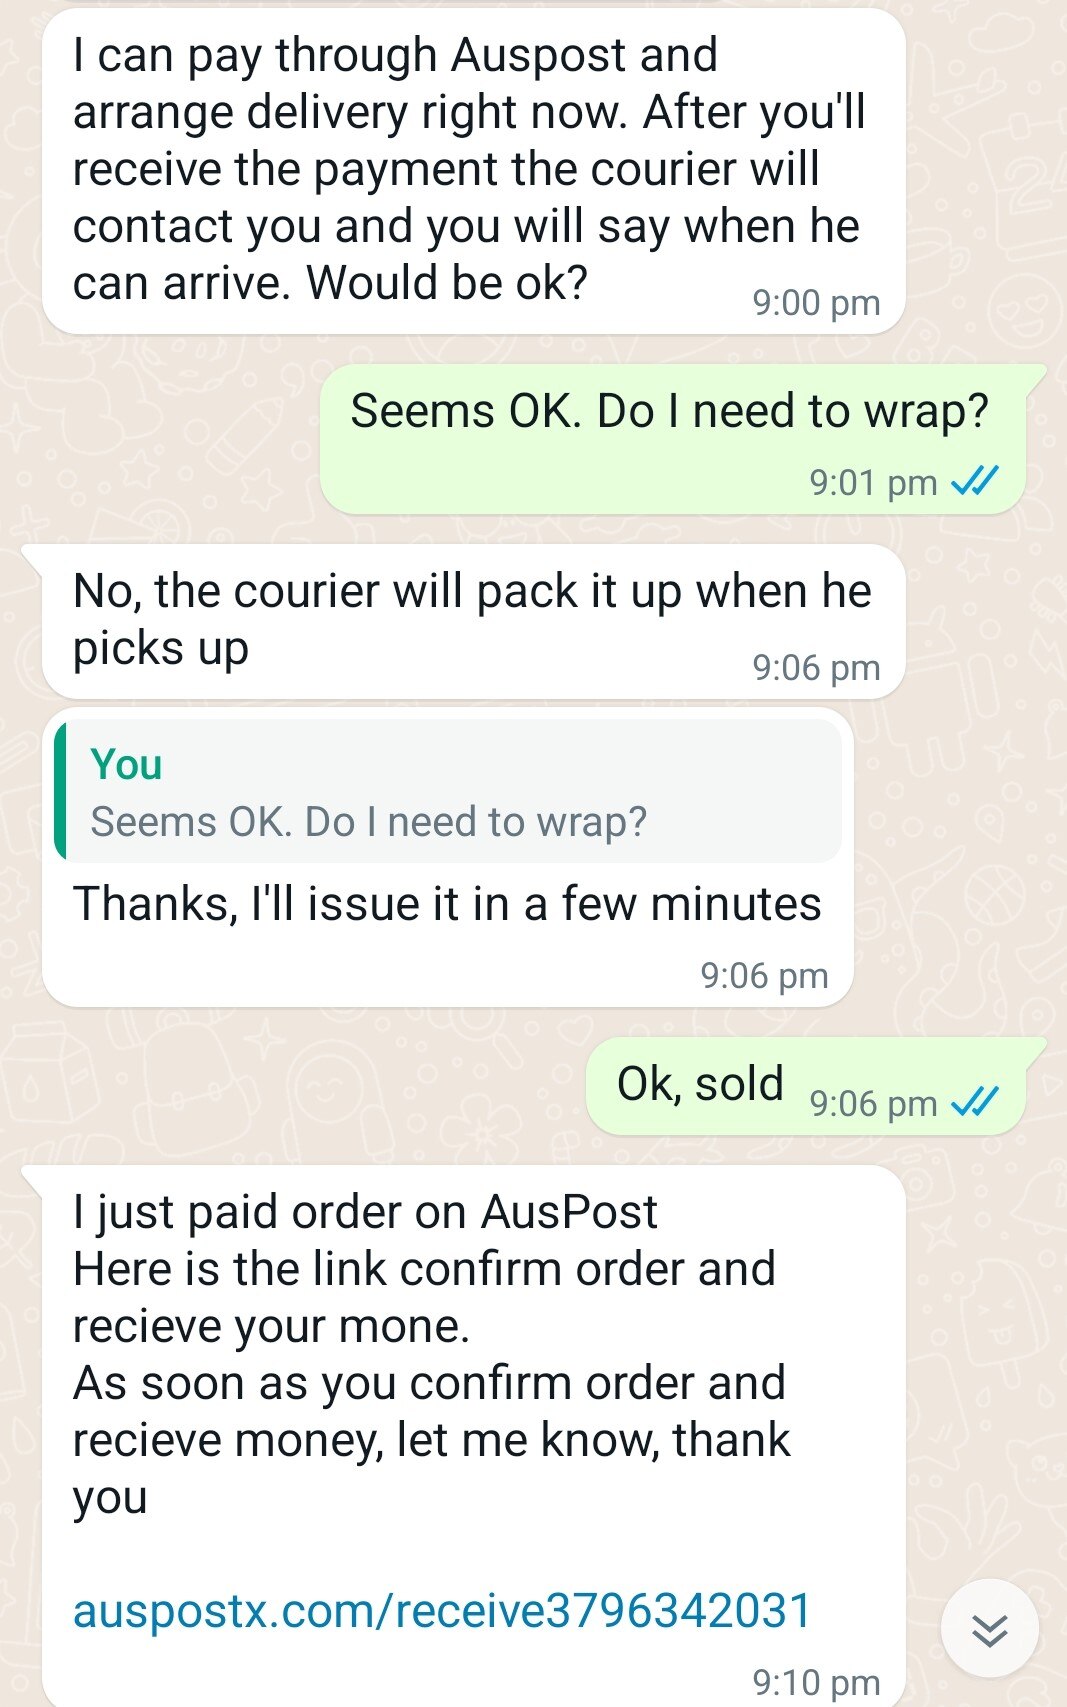 They send my money to a obvious fake bag seller / scammer.these